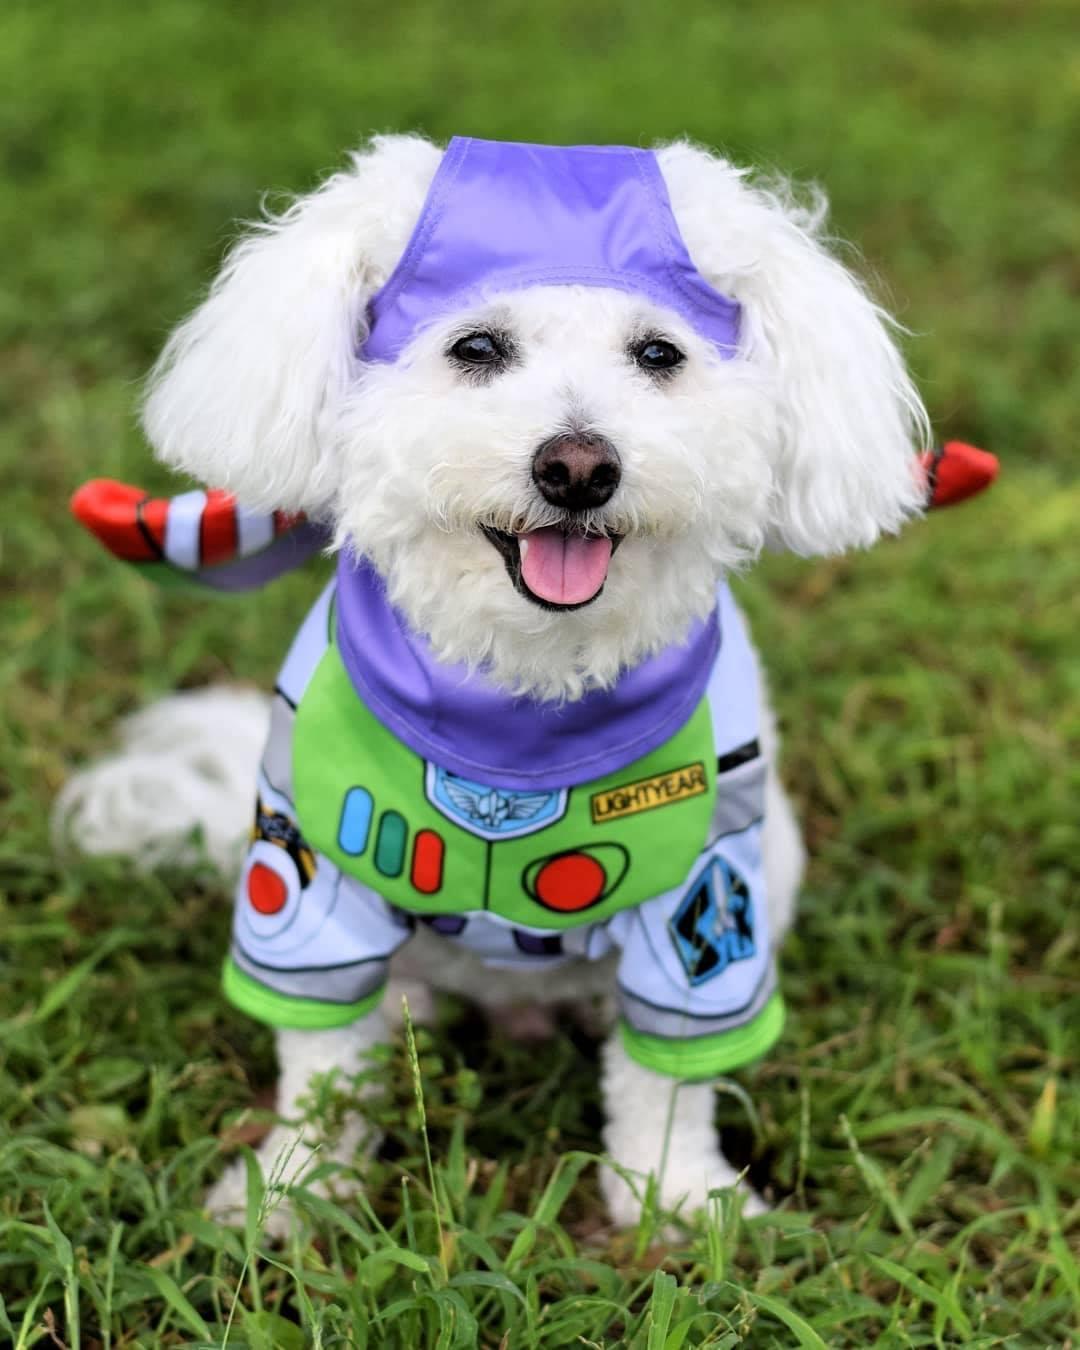 The 20 Best Halloween Dog Costumes for 2020 - BringFido